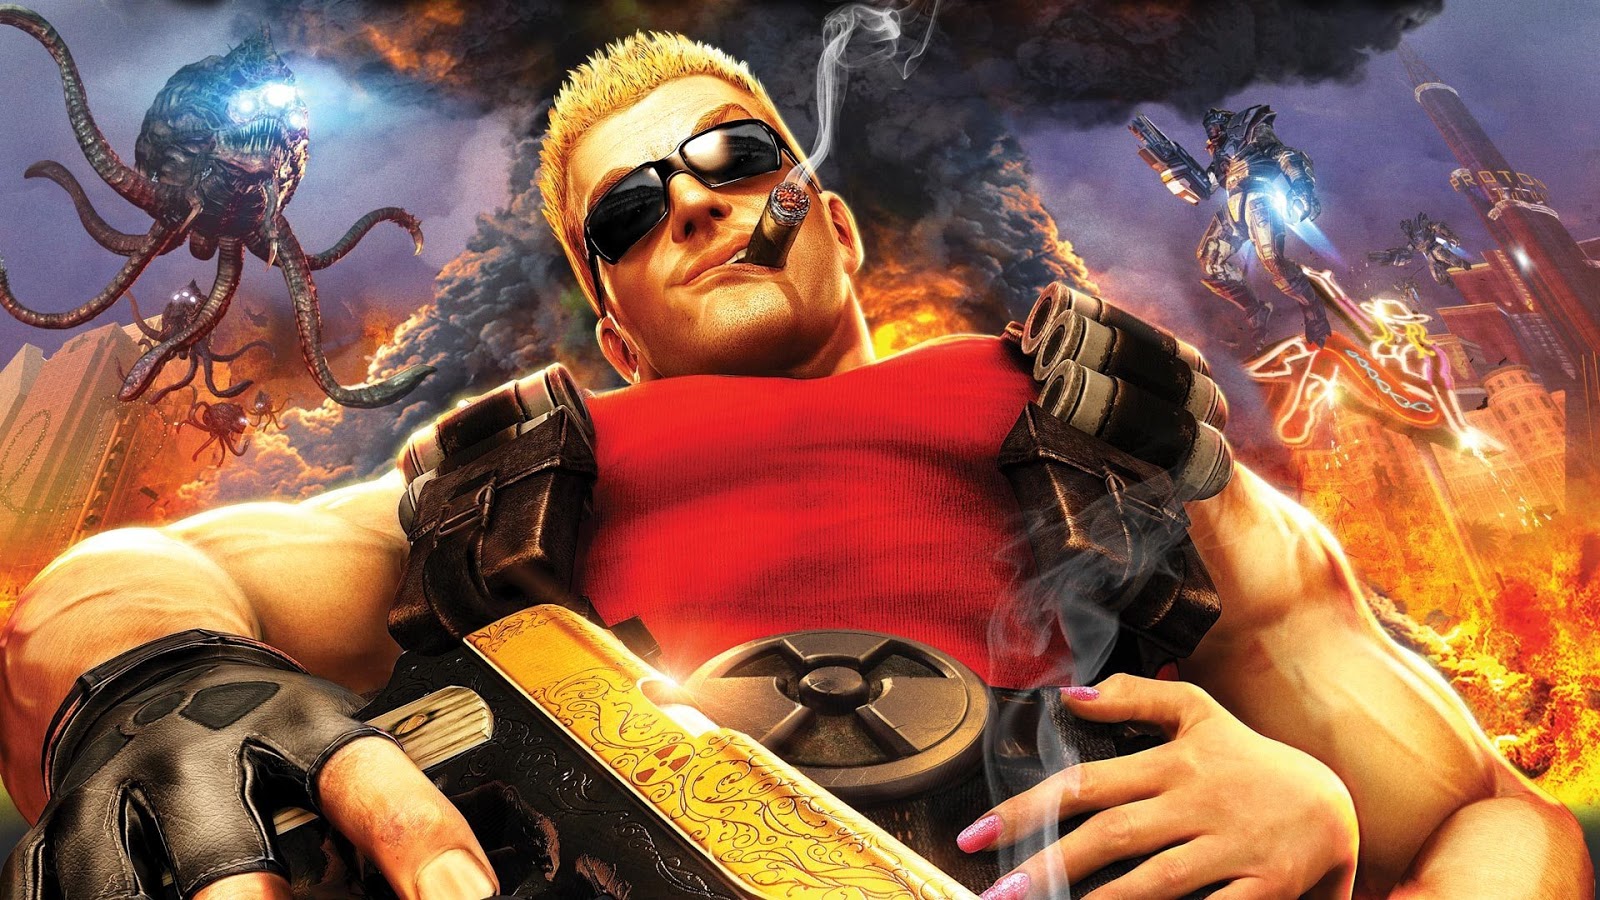 You are supposed to be here! 22 года релизу легендарной игры Duke Nukem 3D - 1